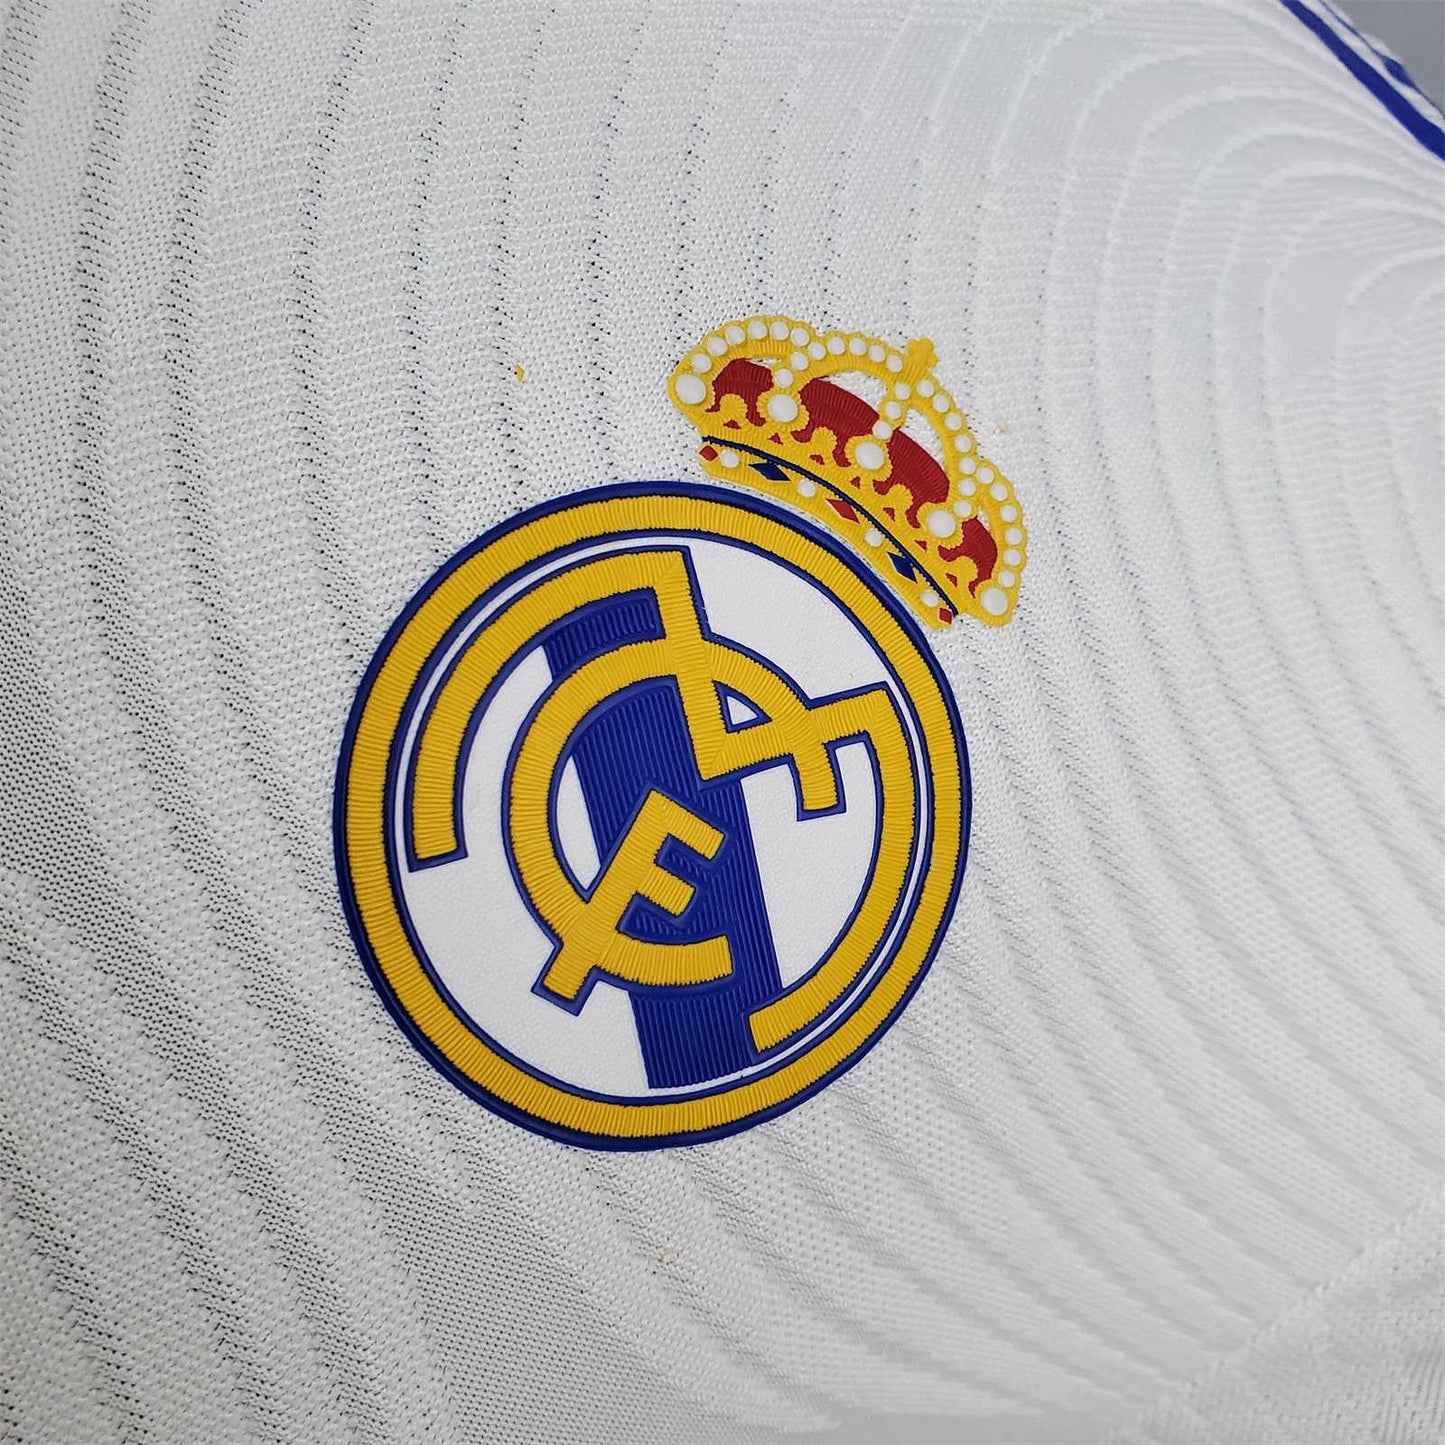 Real Madrid 2021/2022 Home Kit - Player Version